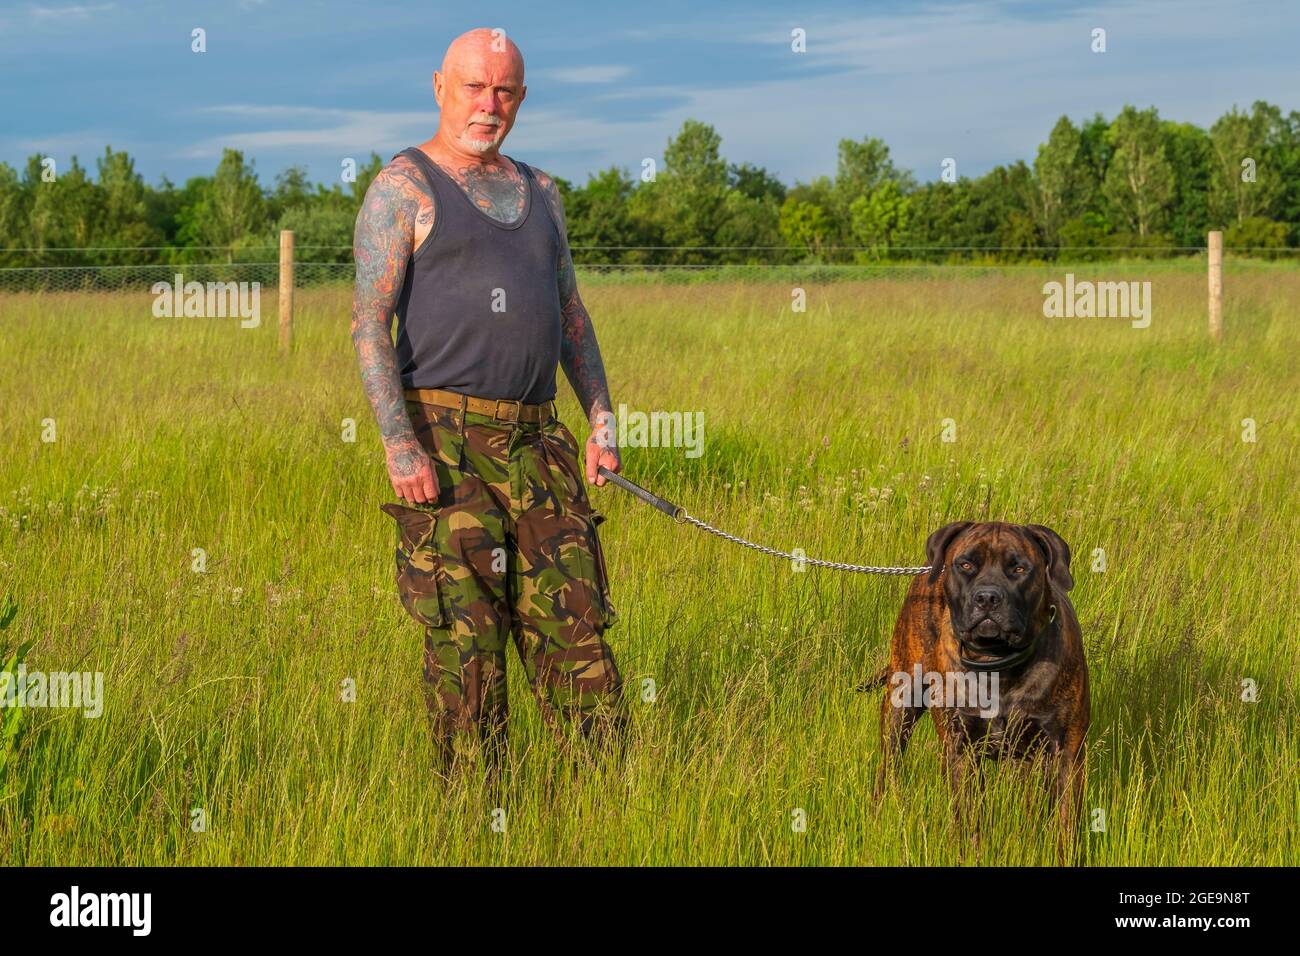 A Boelboel dog with the owner. Stock Photo